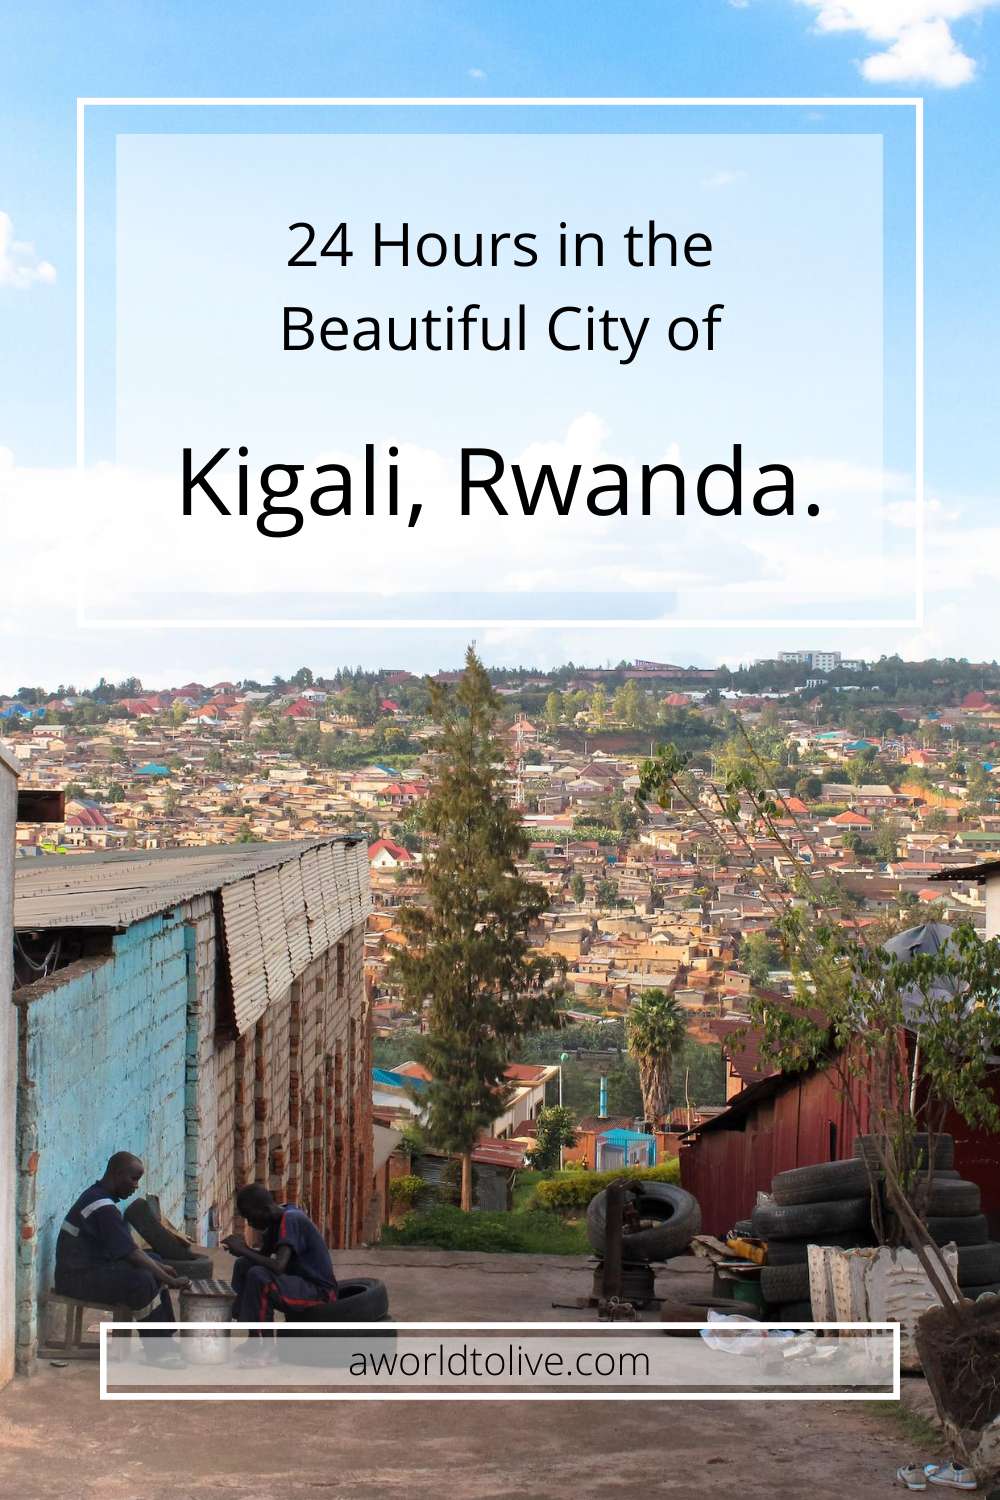 Looking down a side street in Kigali, the hills filled with buildings can be seen in the distance and two local men work on the side of the road. Over the image is text saying 24 hours in the Beautiful city of Kigali, Rwanda.